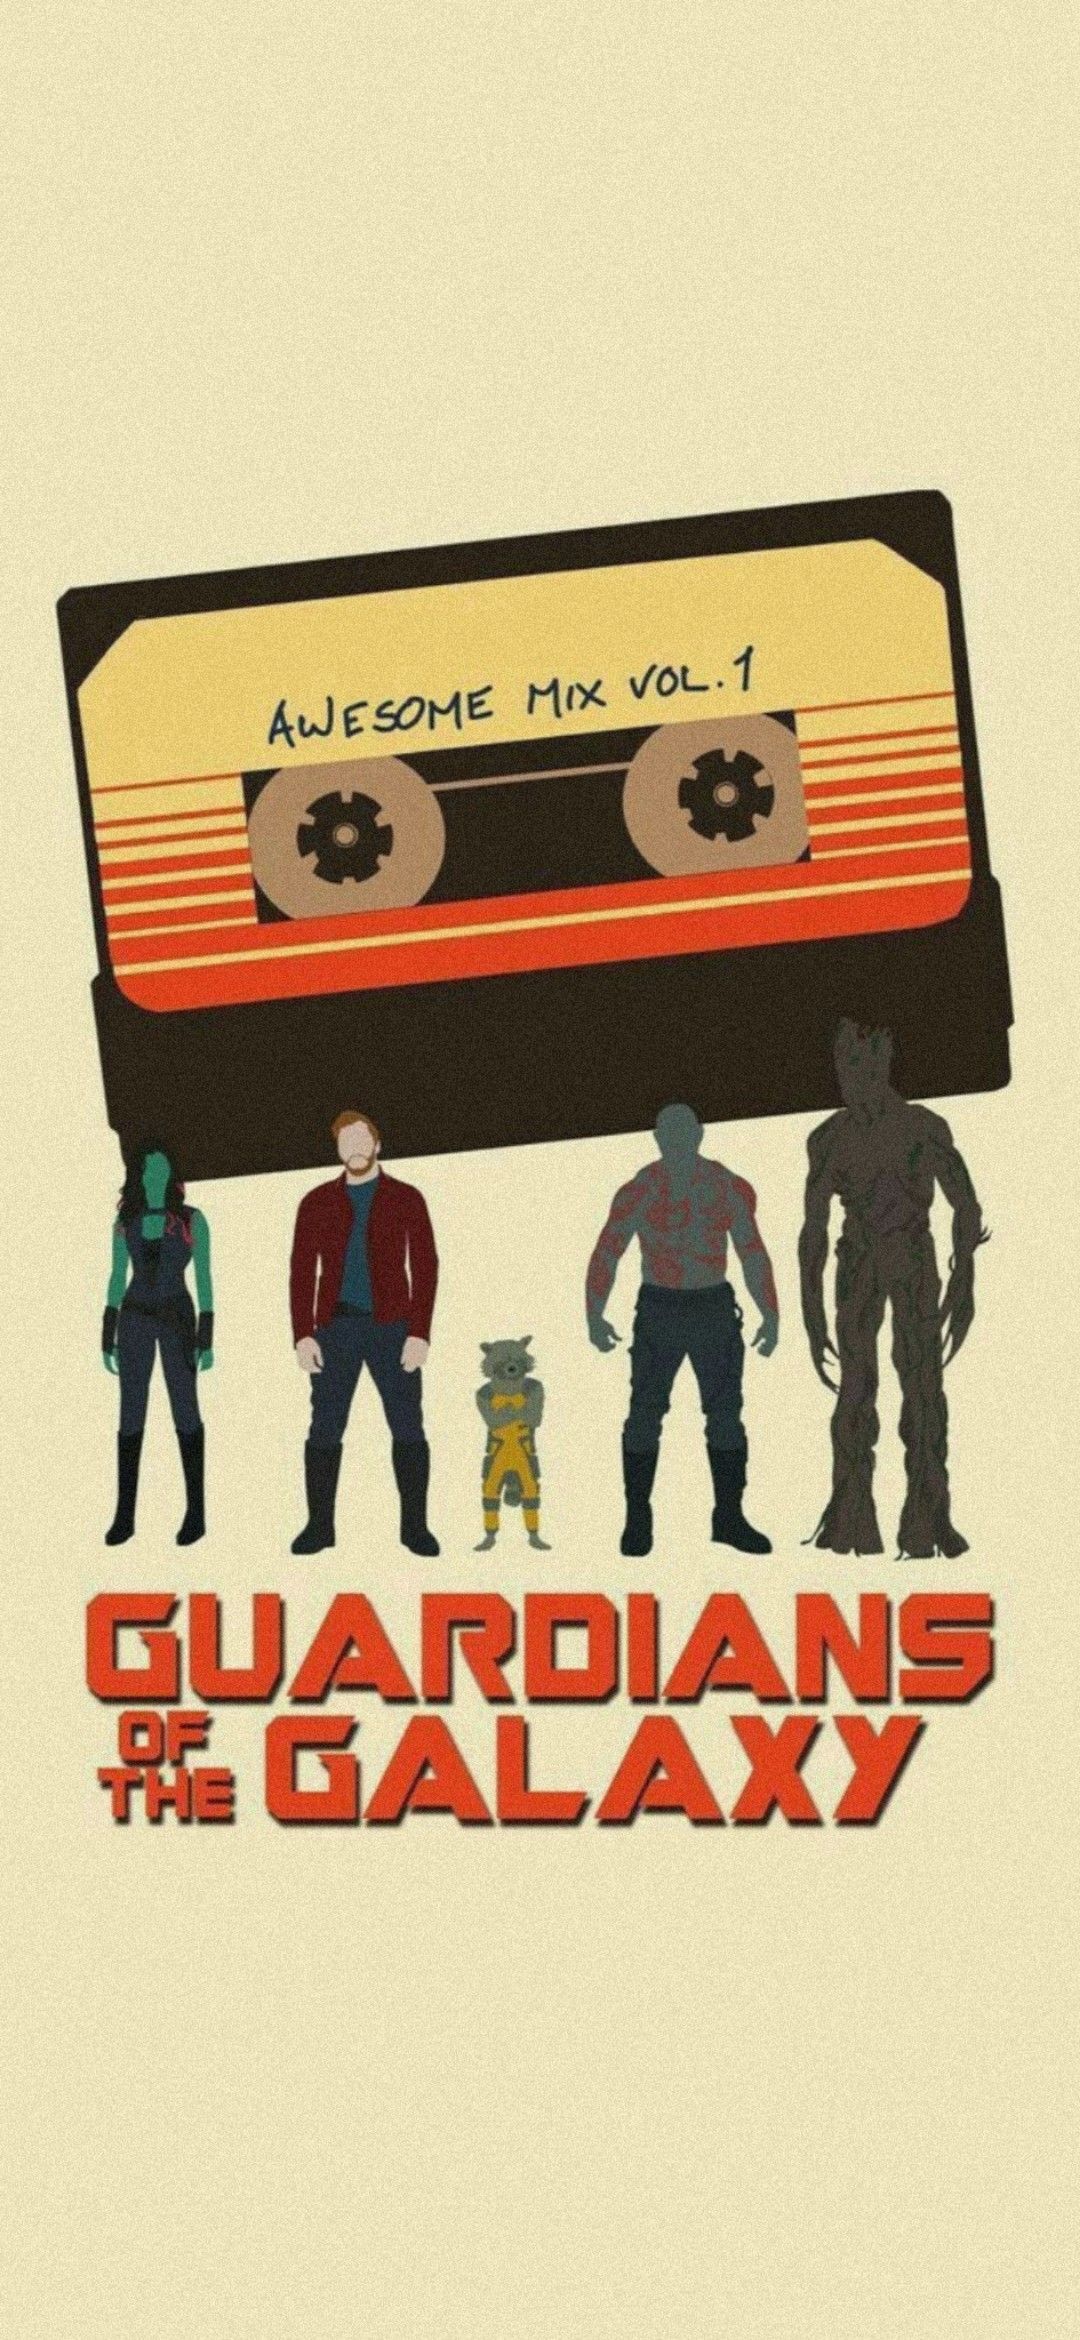 Guardians of the galaxy Wallpaper. Marvel comics wallpaper, Avengers wallpaper, Marvel wallpaper hd